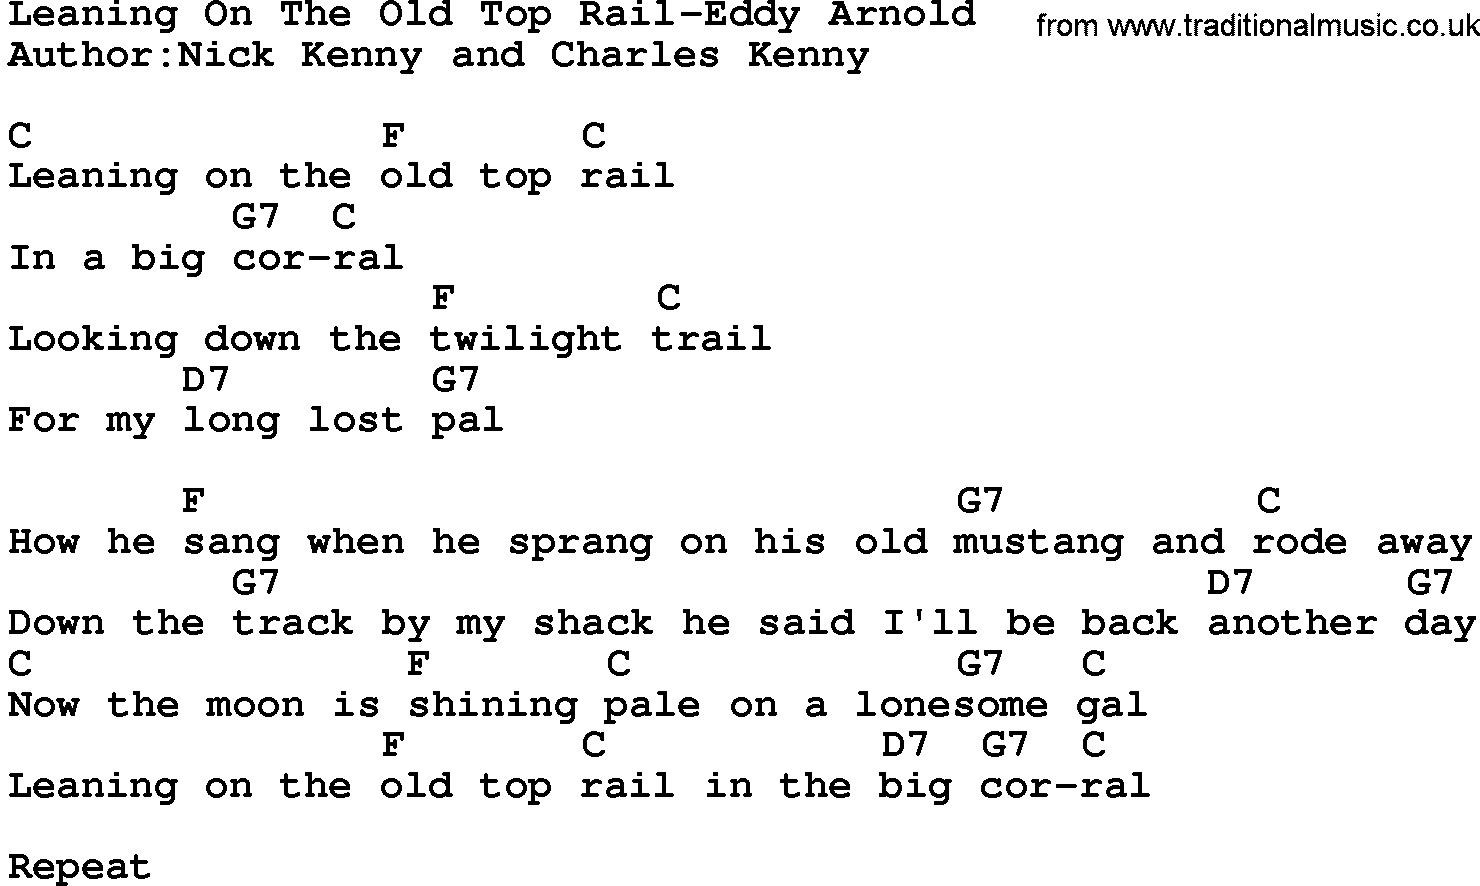 Country music song: Leaning On The Old Top Rail-Eddy Arnold lyrics and chords